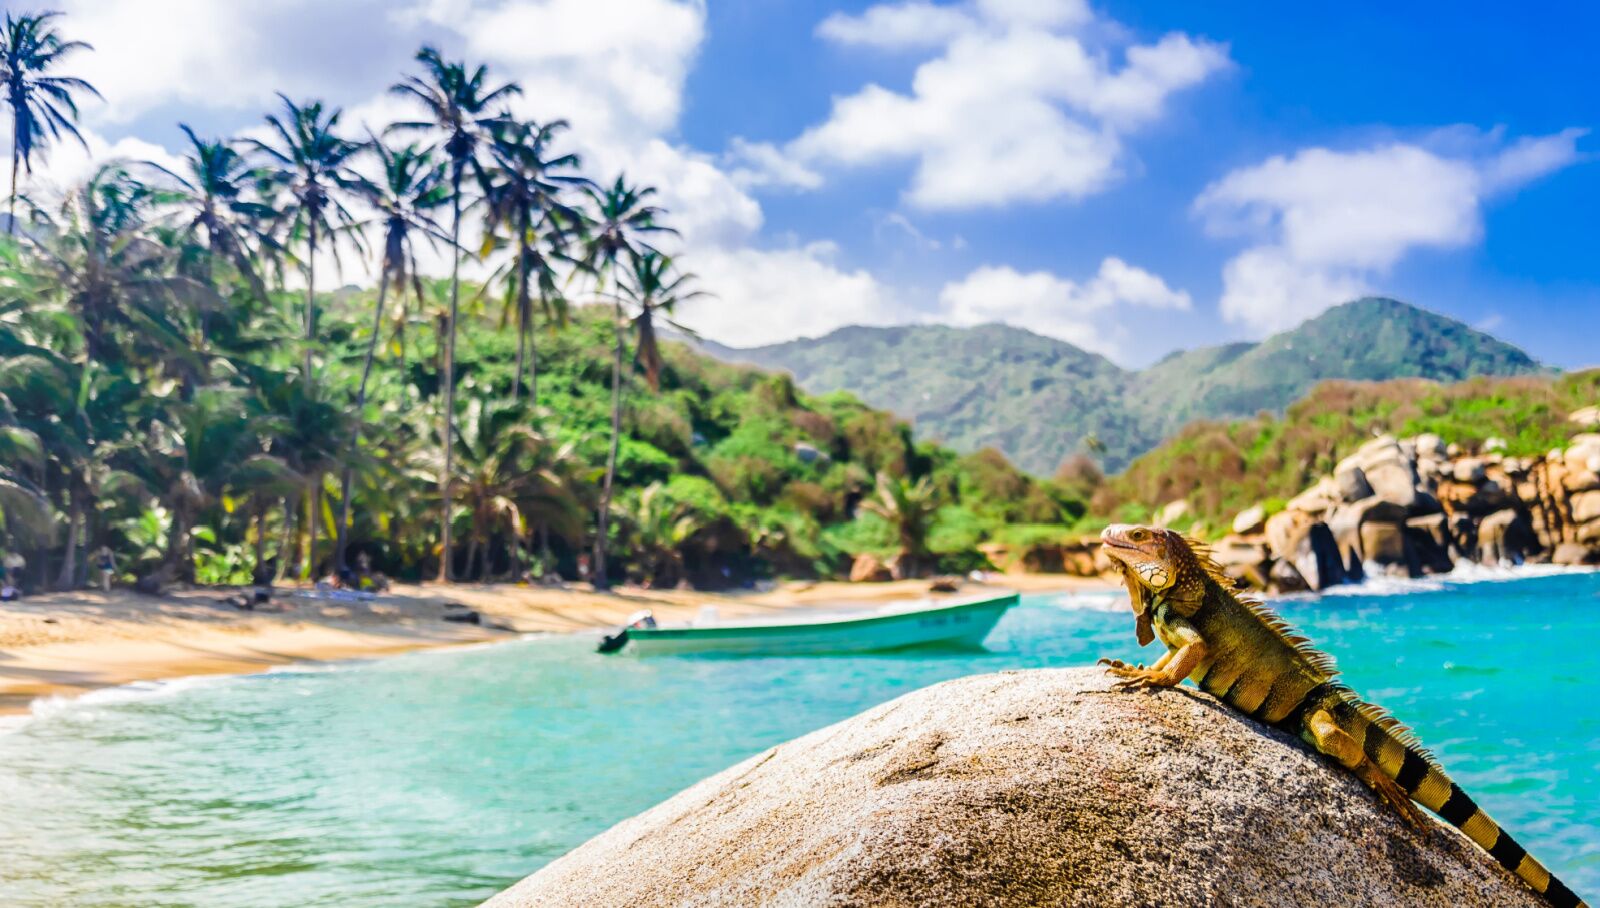 bogota colombia direct flights from lax - lizard on beach 